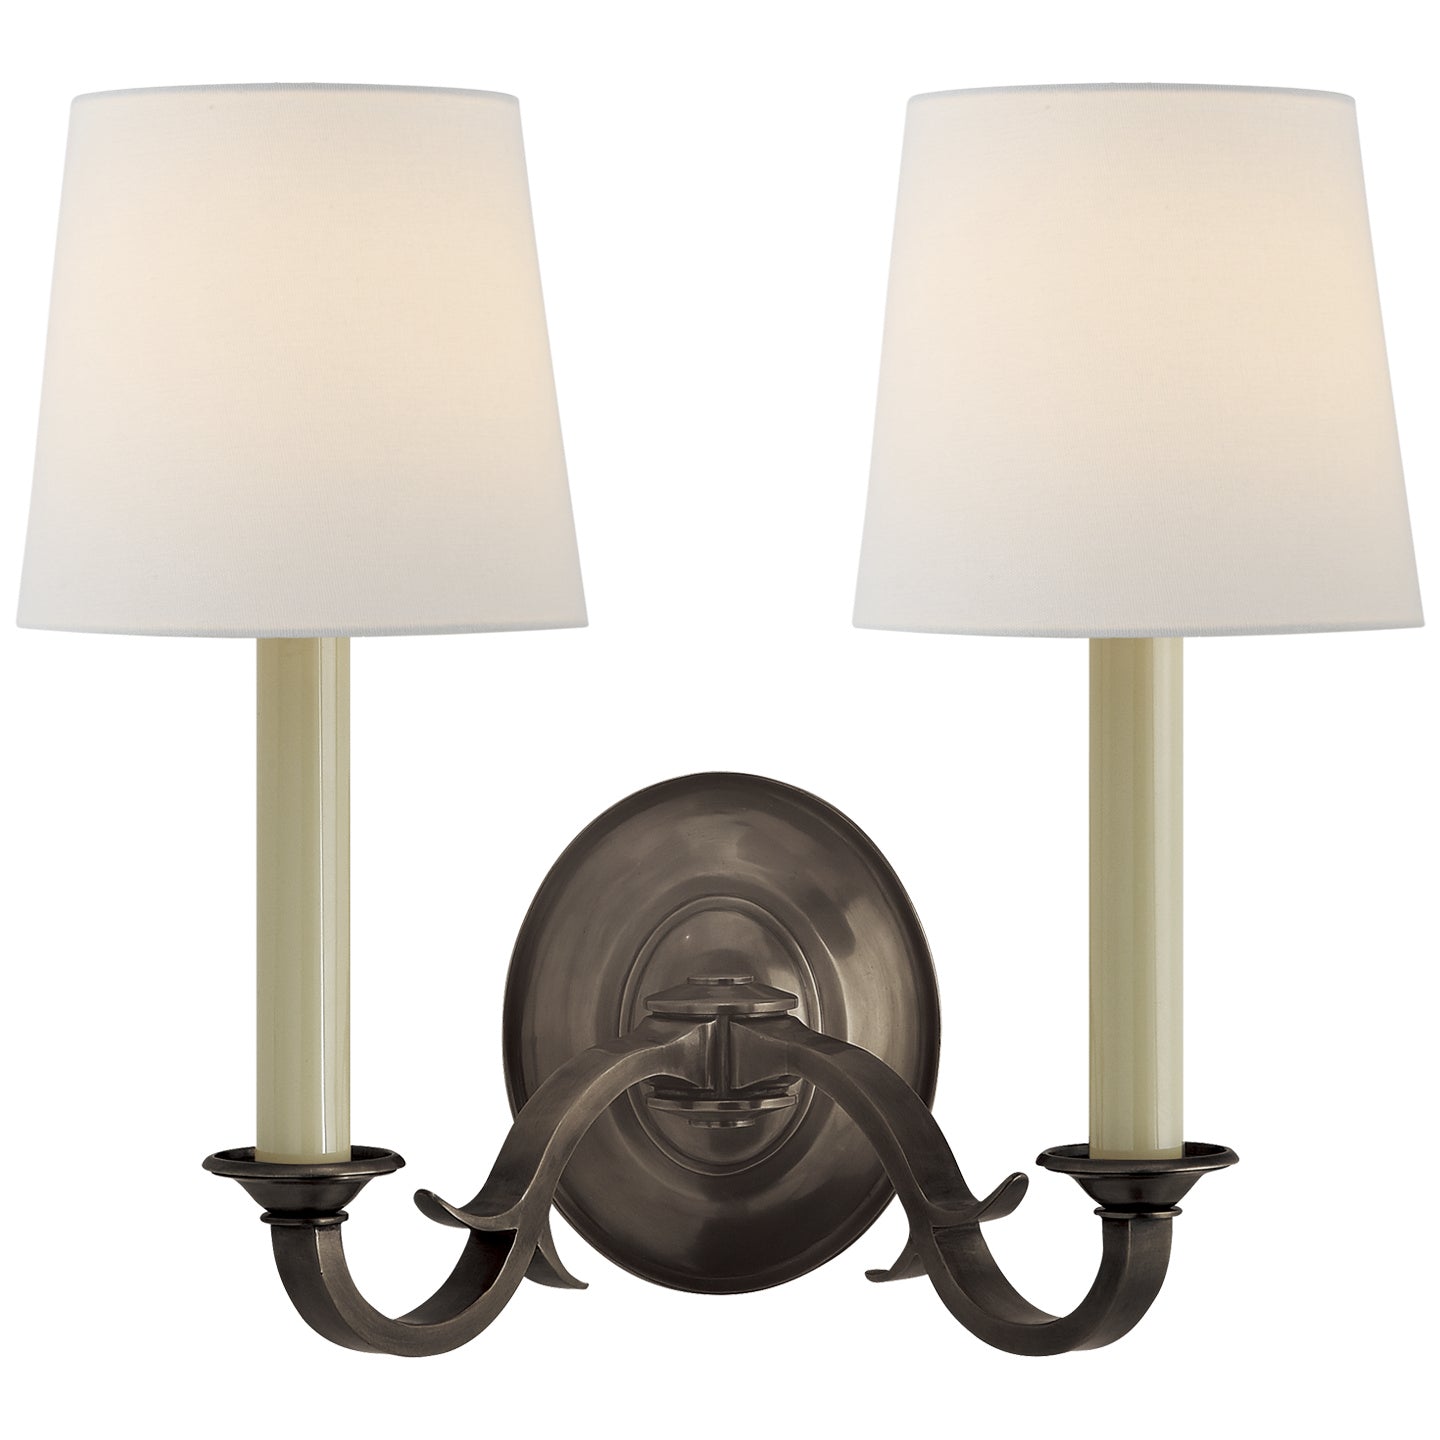 Load image into Gallery viewer, Visual Comfort Signature - TOB 2121BZ-L - Two Light Wall Sconce - Channing - Bronze
